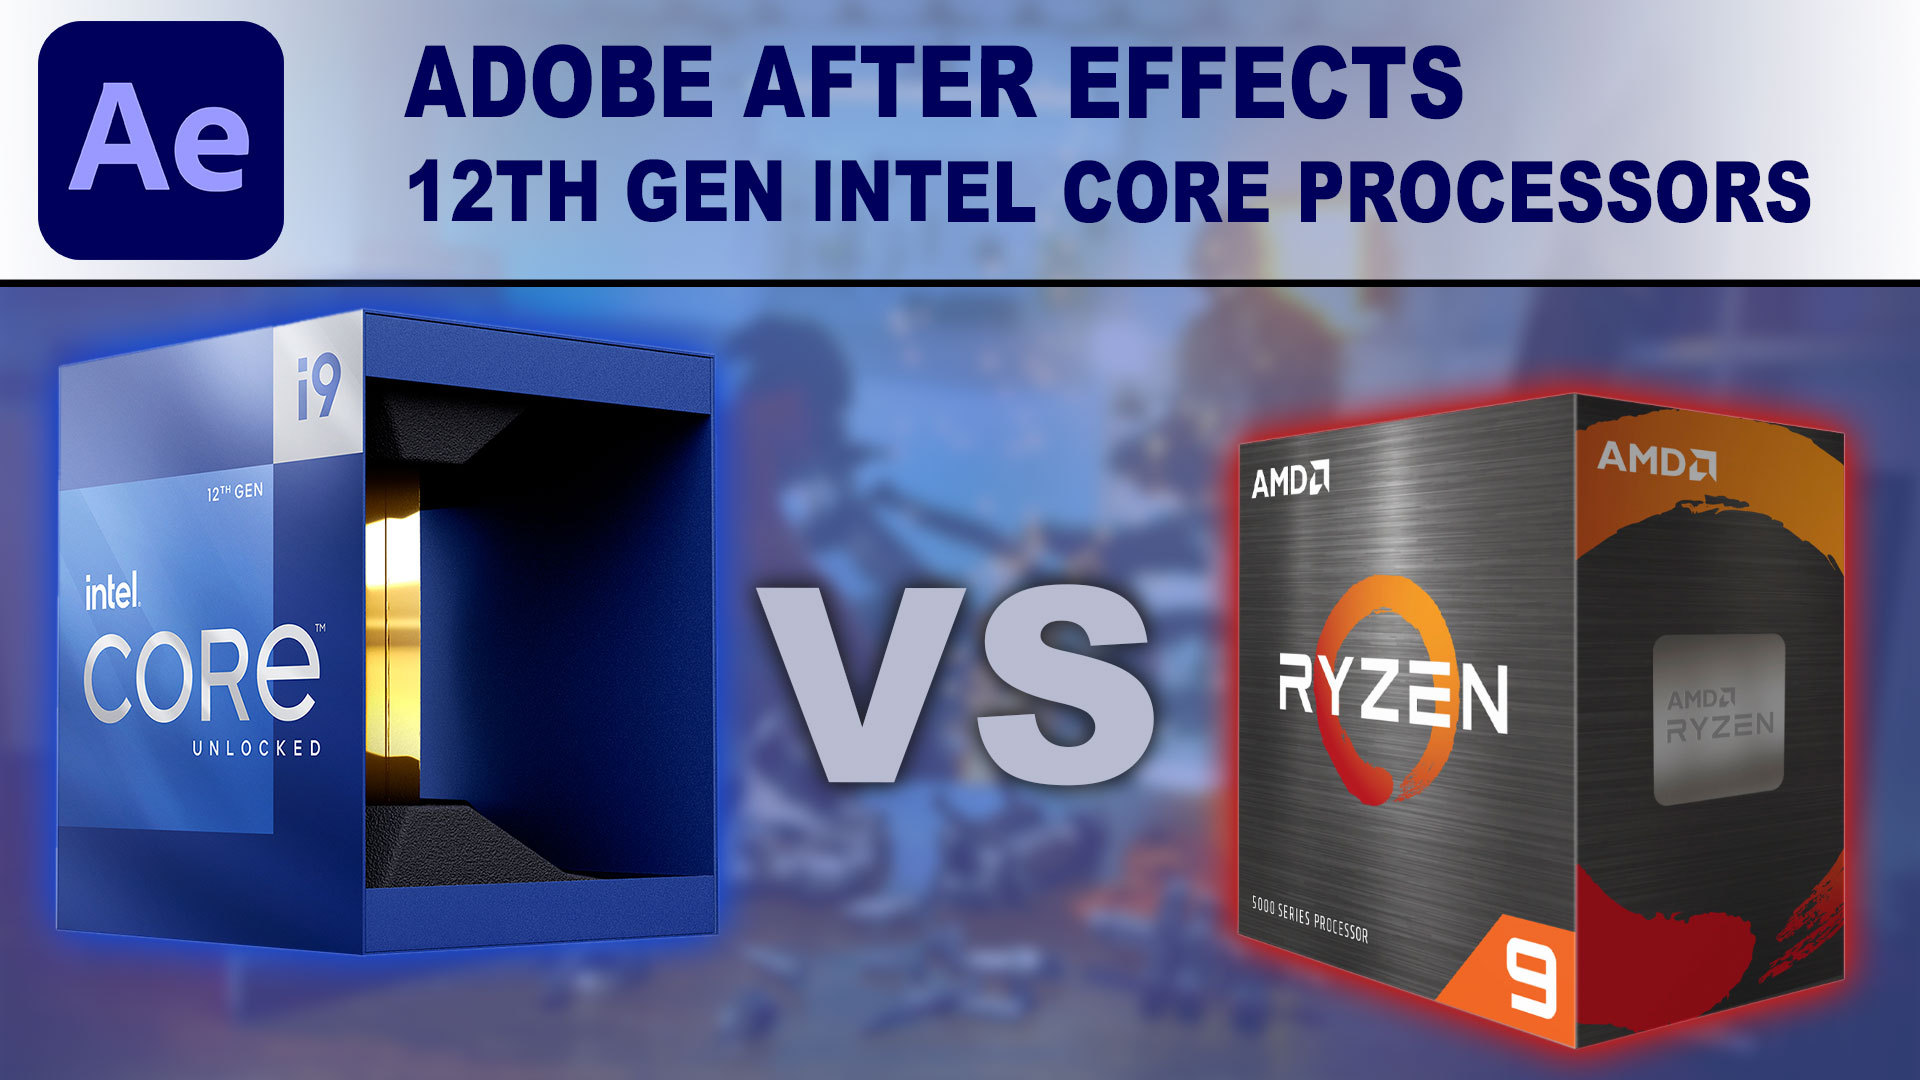 12th Gen Intel Core Processors for Adobe After Effects